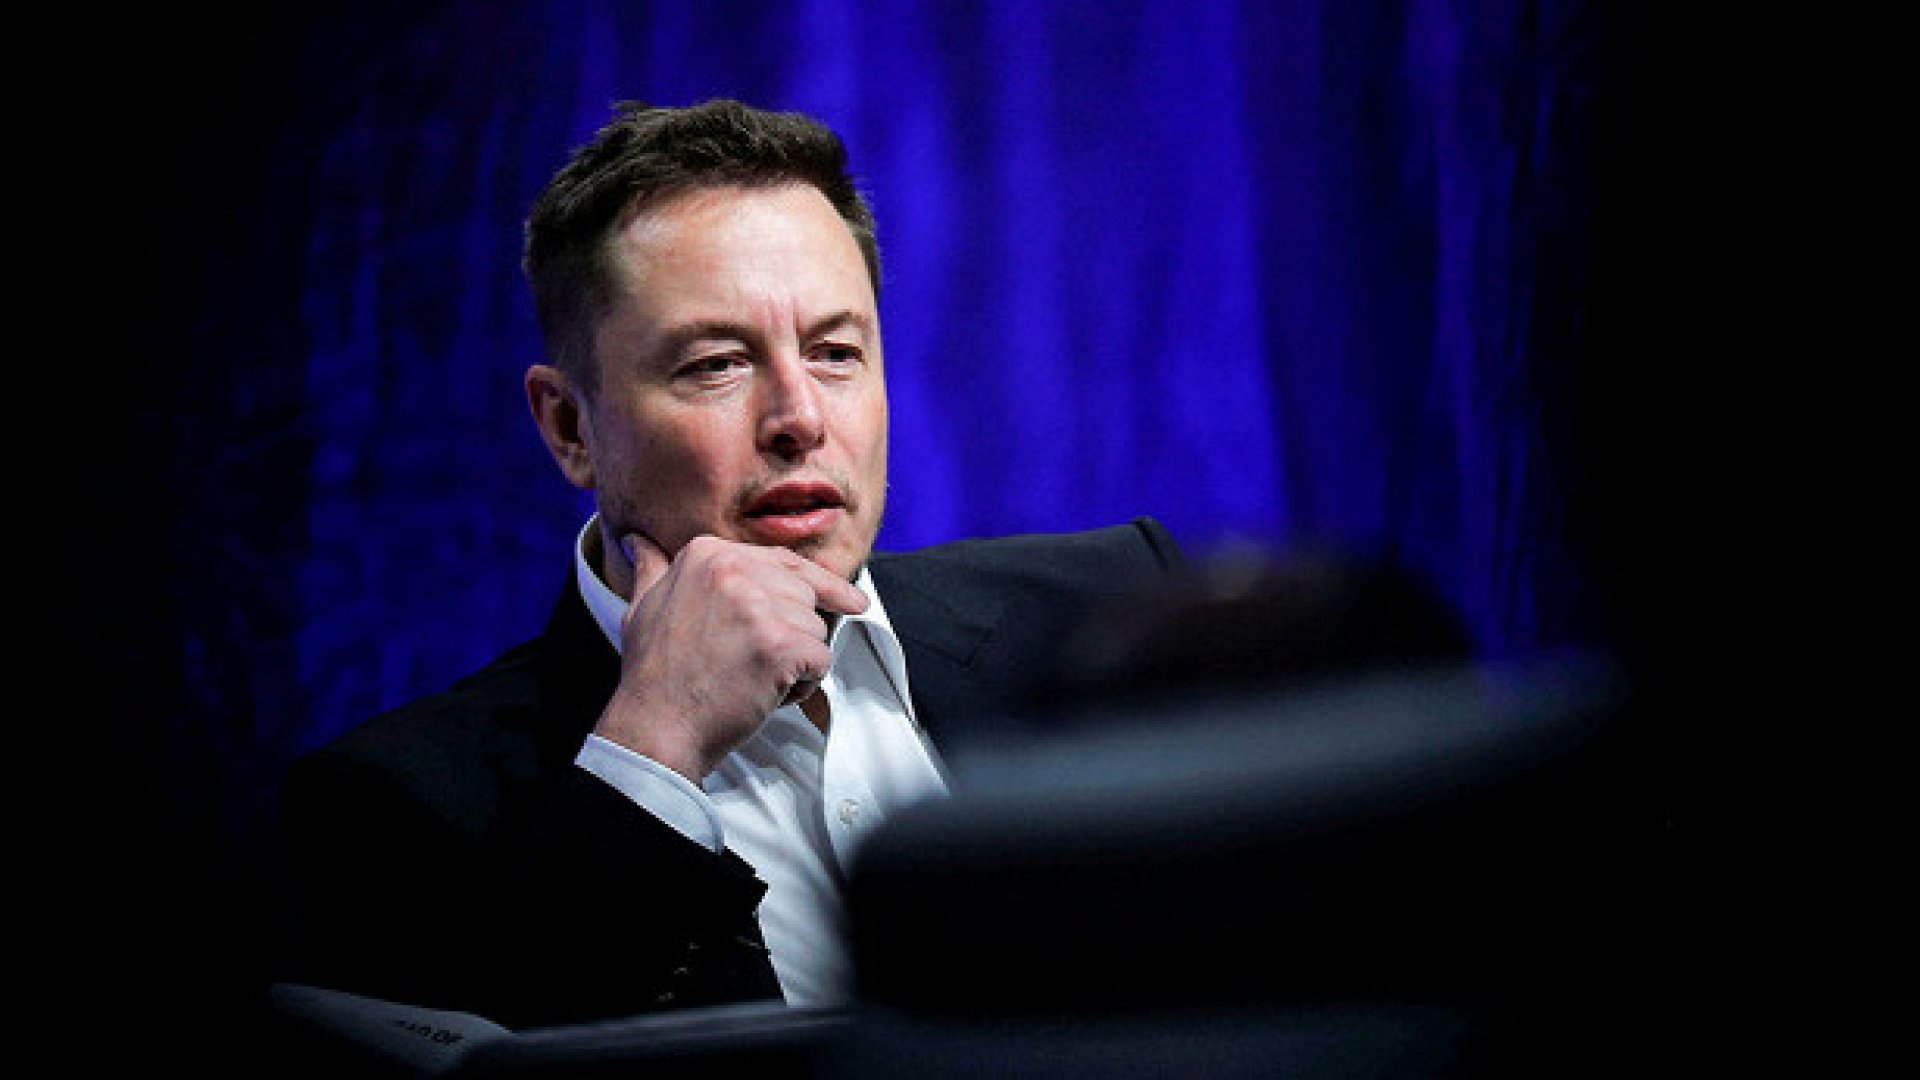 Elon Musk says Tesla would be close up if its cars spied in China, elsewhere